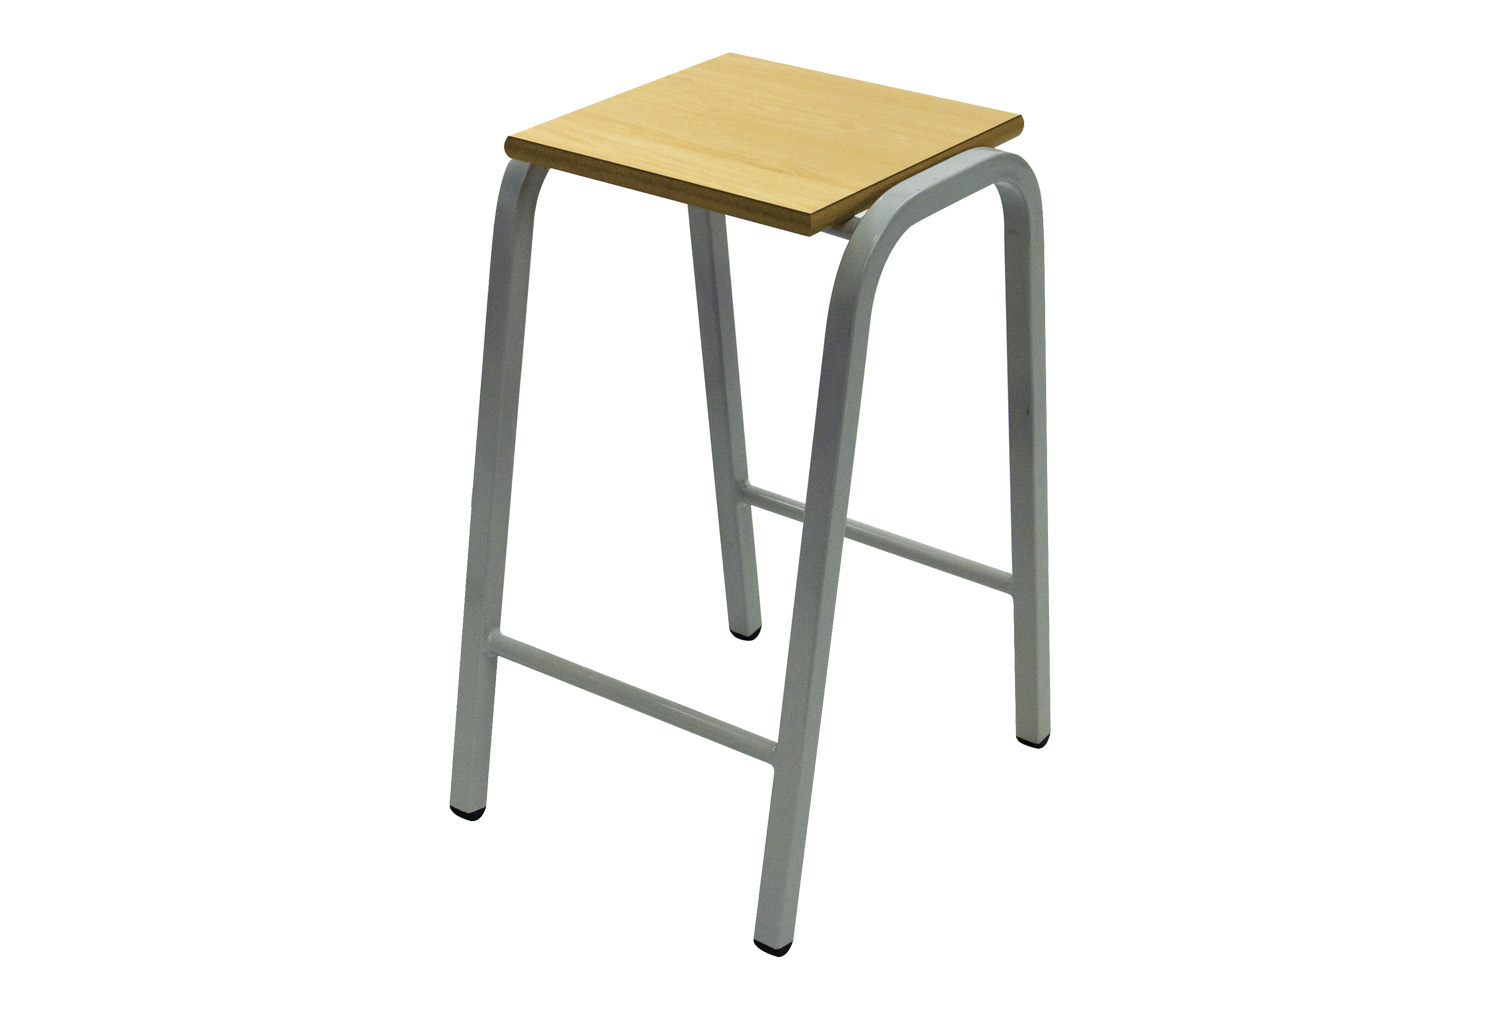 Qty 6 - Educate Heavy Duty Wooden Top Classroom Stools, 35wx30dx51h (cm), Light Grey Frame, Beech Top